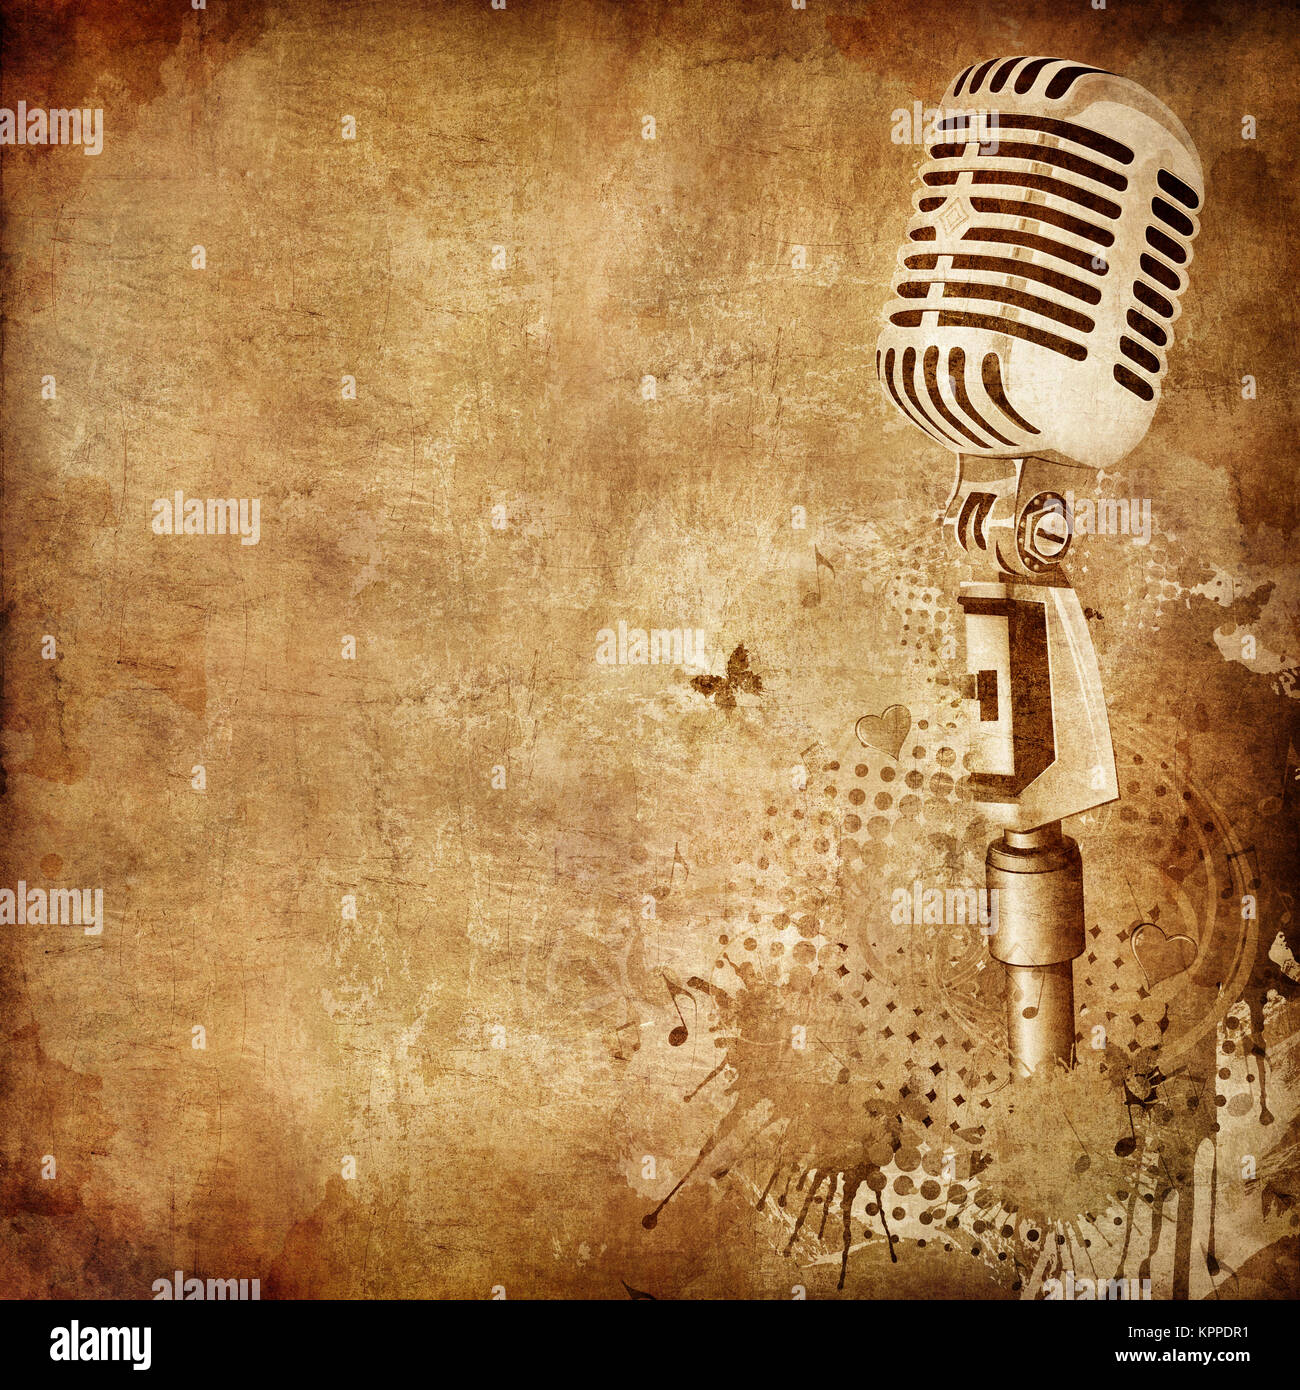 Old Paper. Retro Music Texture Background. Vector Stock Photo - Alamy